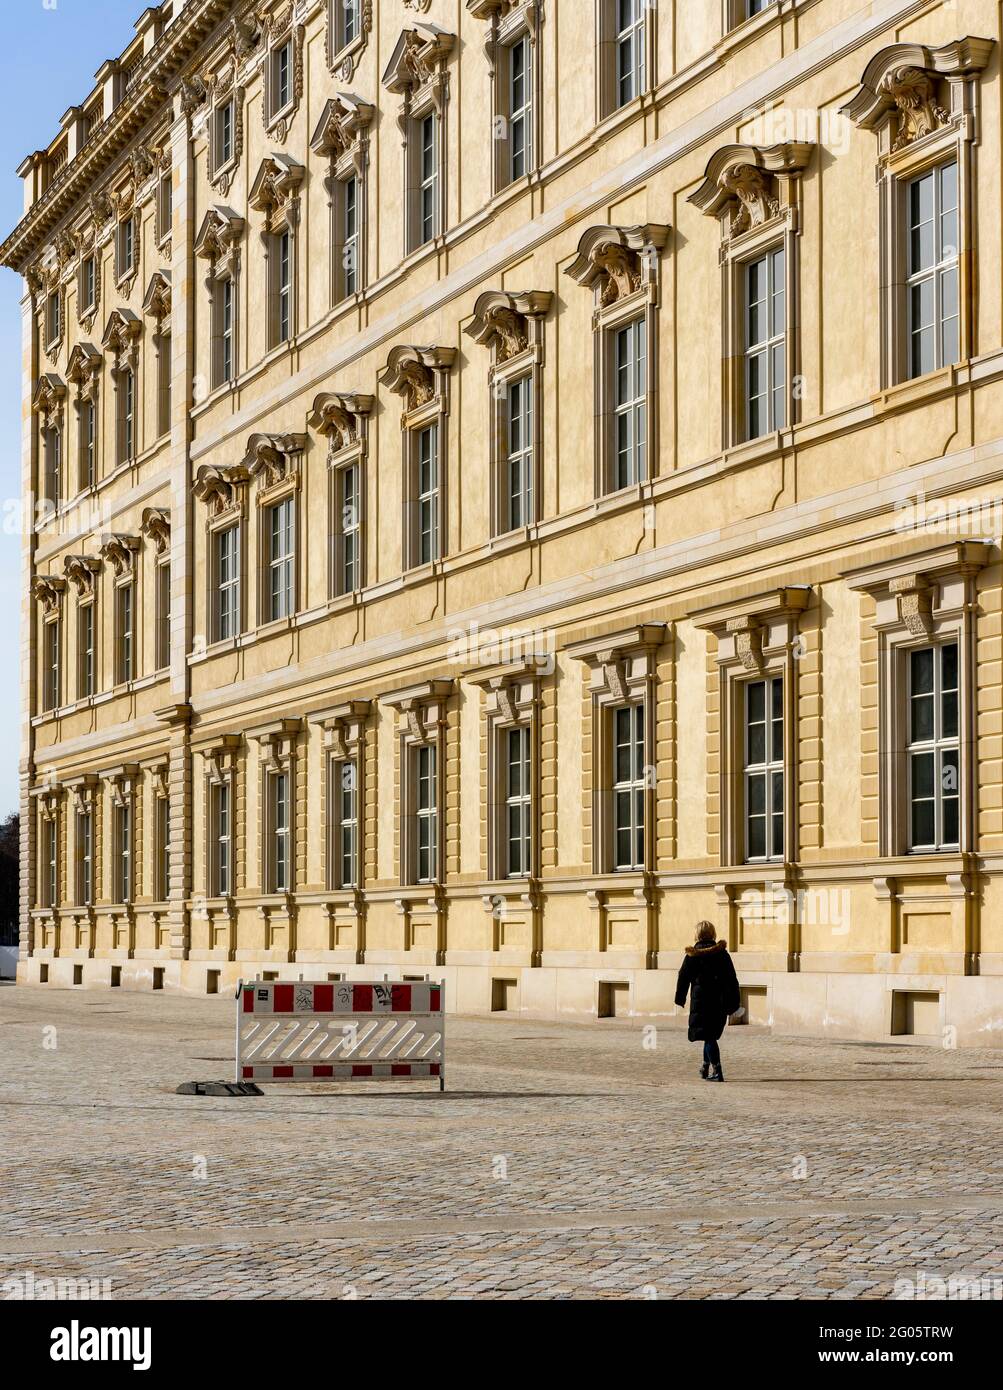 The Facade Of The Rebuilt City Palace With The Humboldt Forum Unter Den Linden In Berlin Stock Photo